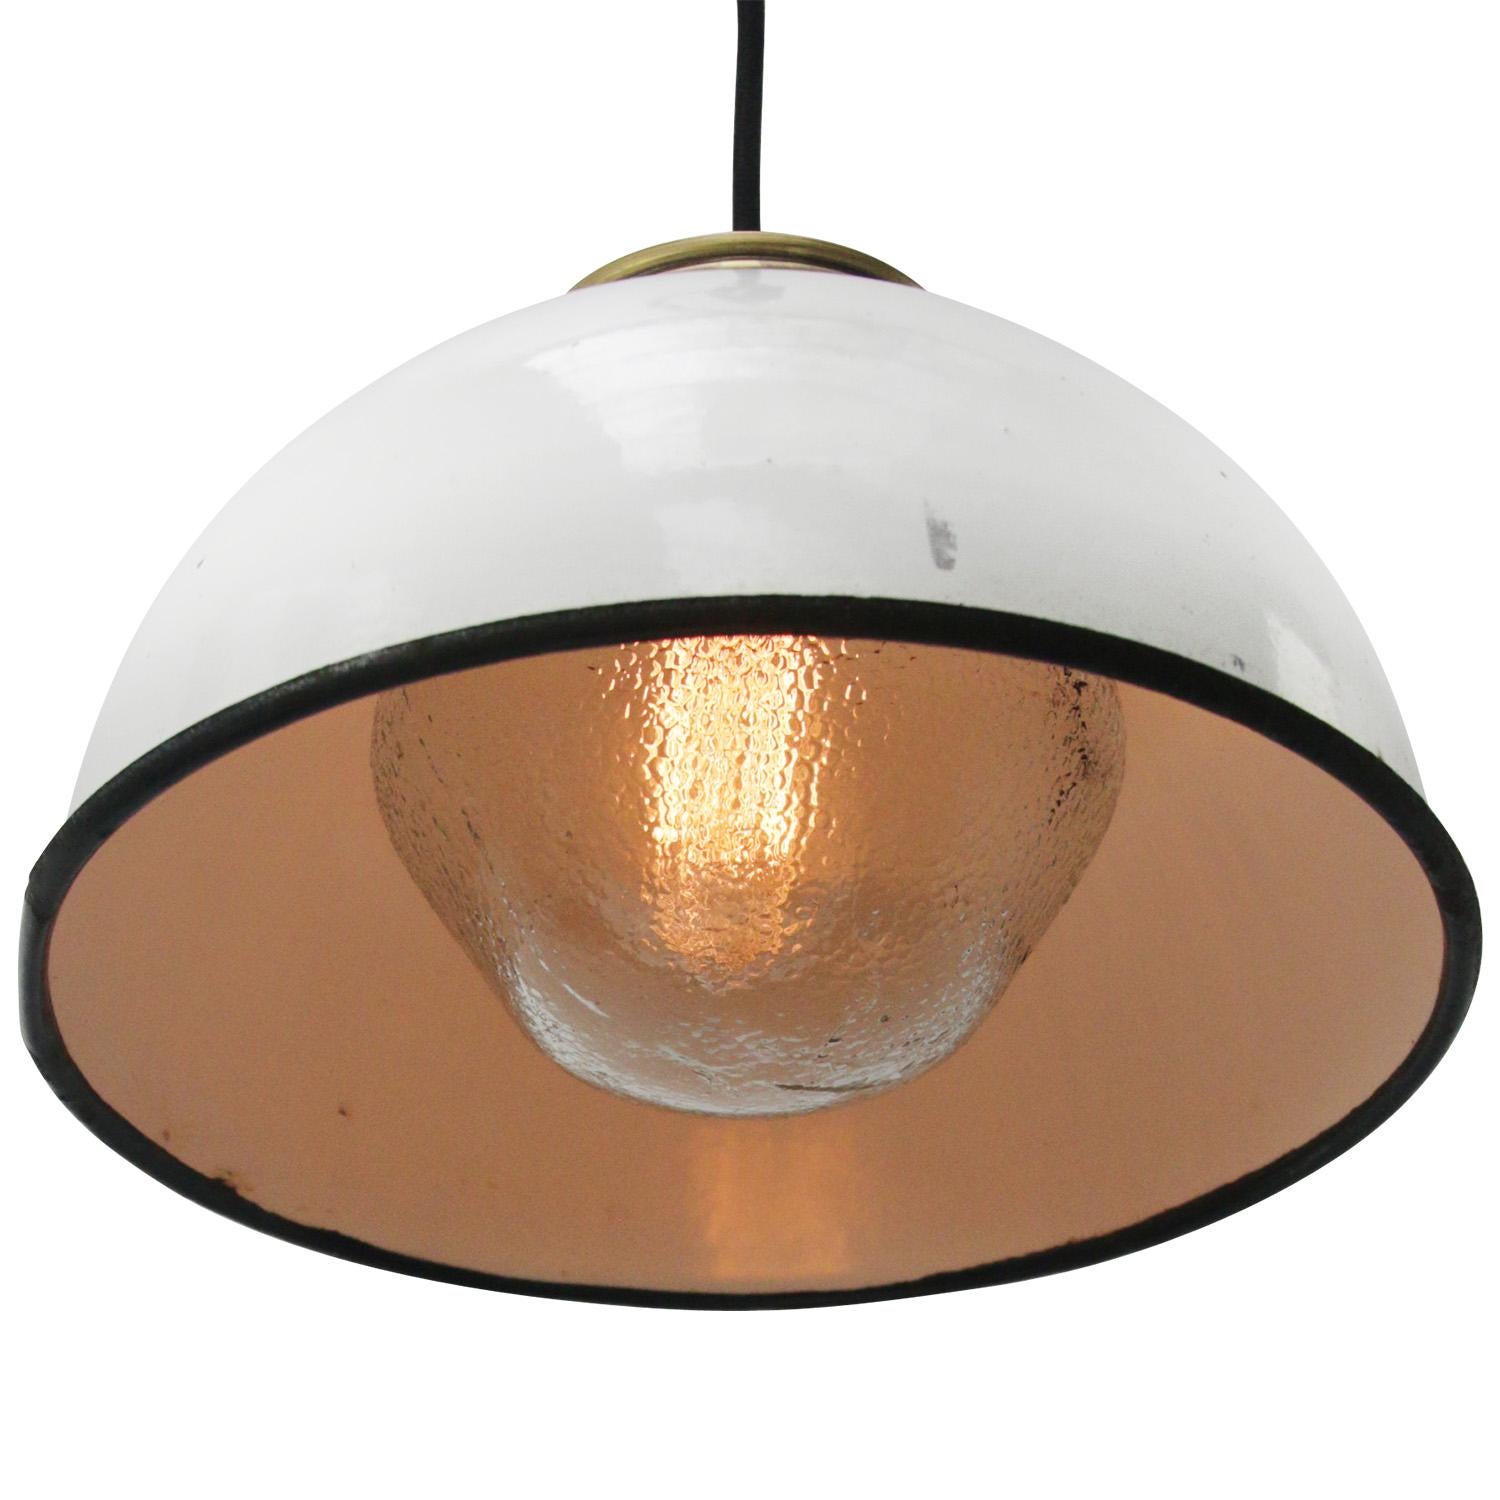 White enamel Industrial hanging lamp.
Frosted glass with brass top.

Weight: 2.35 kg / 5.2 lb

Priced per individual item. All lamps have been made suitable by international standards for incandescent light bulbs, energy-efficient and LED